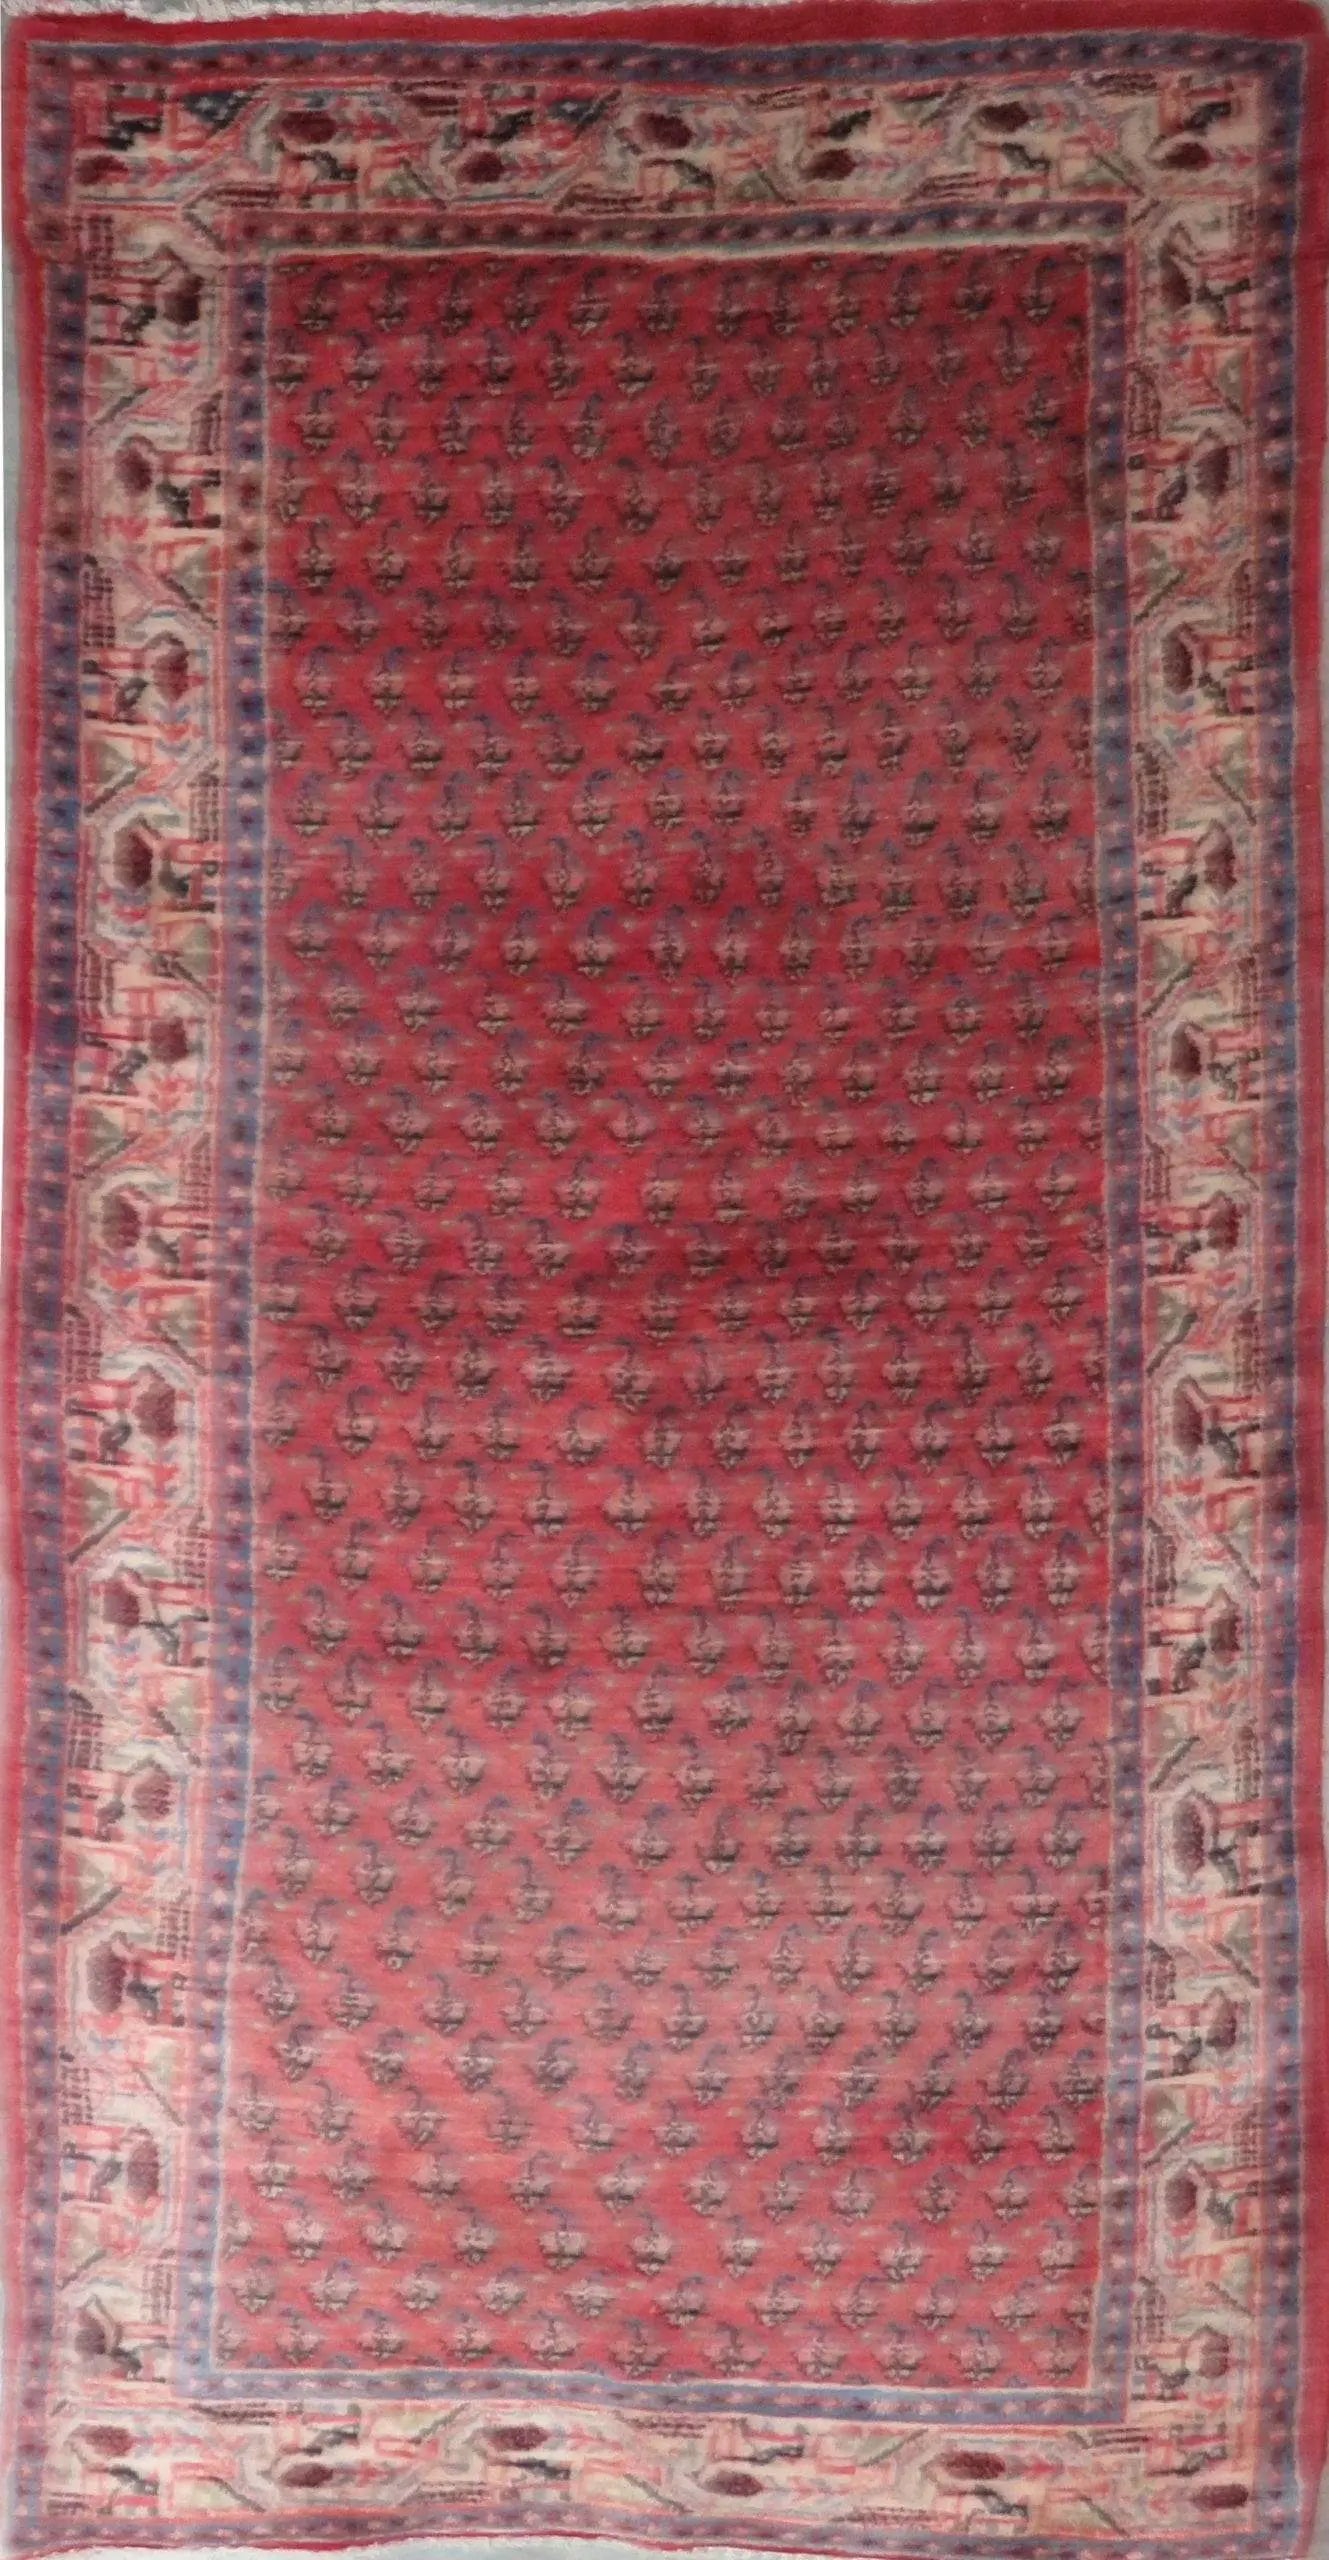 Hand-Knotted Persian Wool Rug _ Luxurious Vintage Design, 7'8" x 4'1", Artisan Crafted